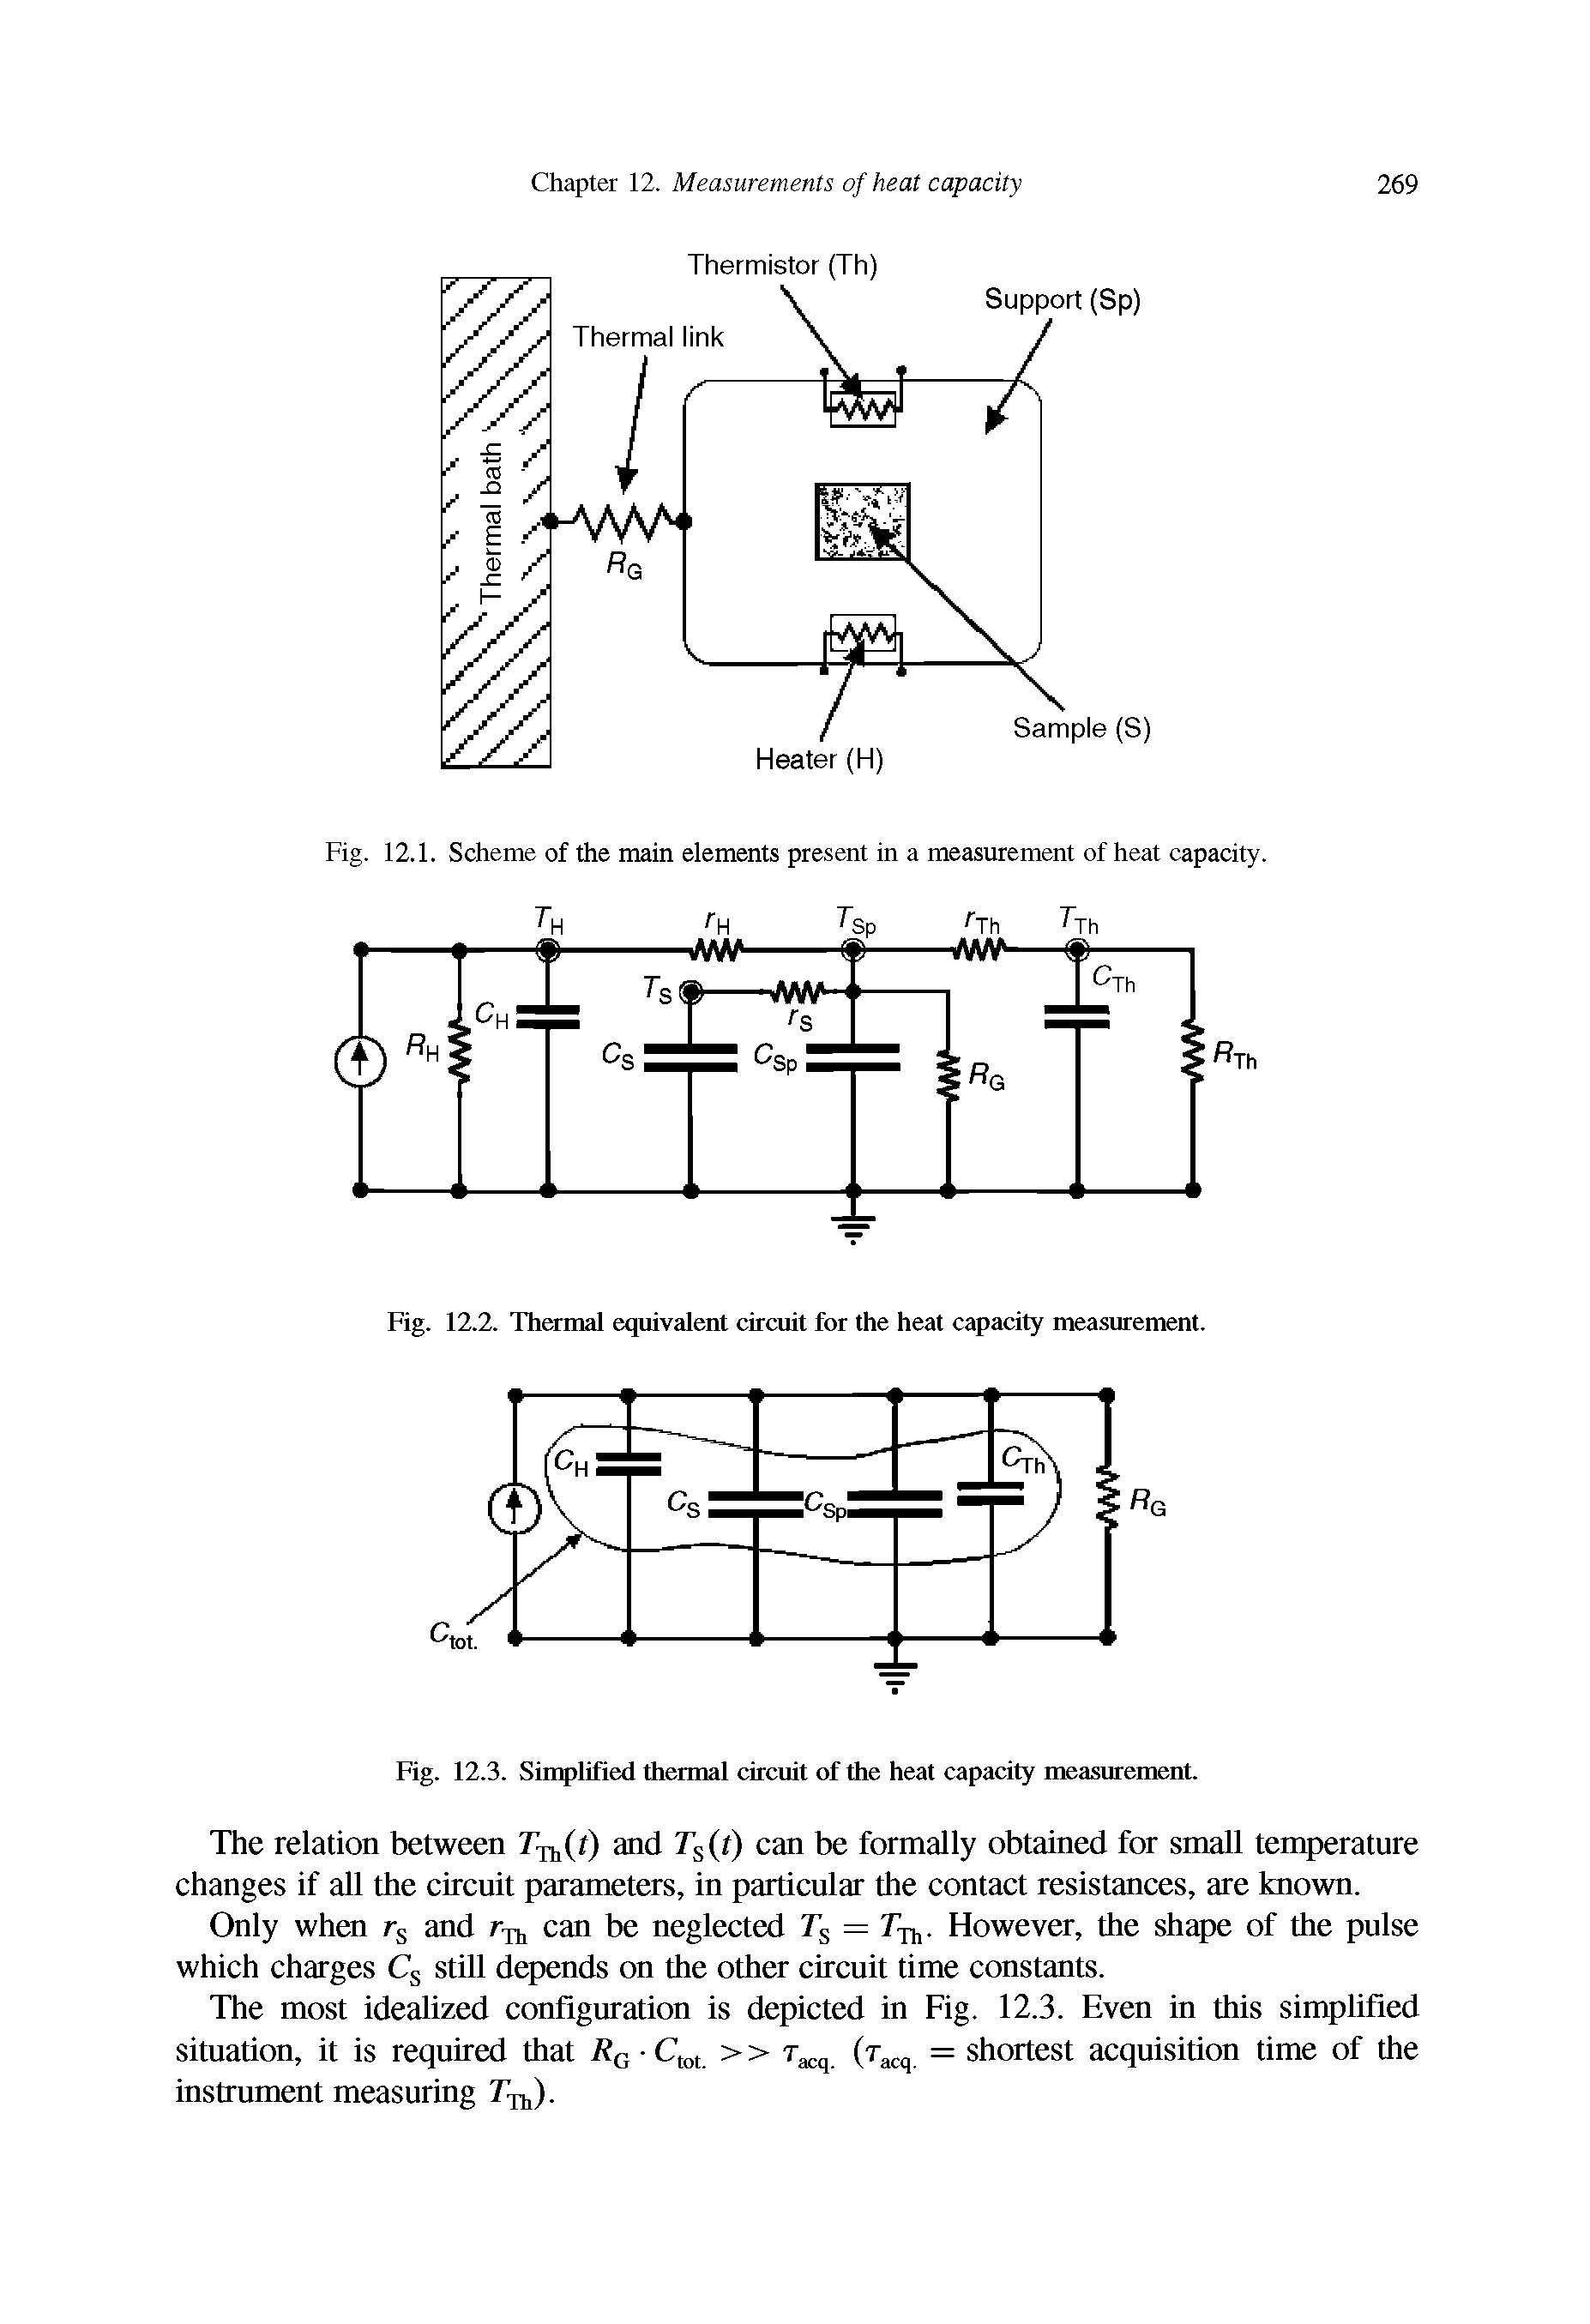 Fig. 12.3. Simplified thermal circuit of the heat capacity measurement.